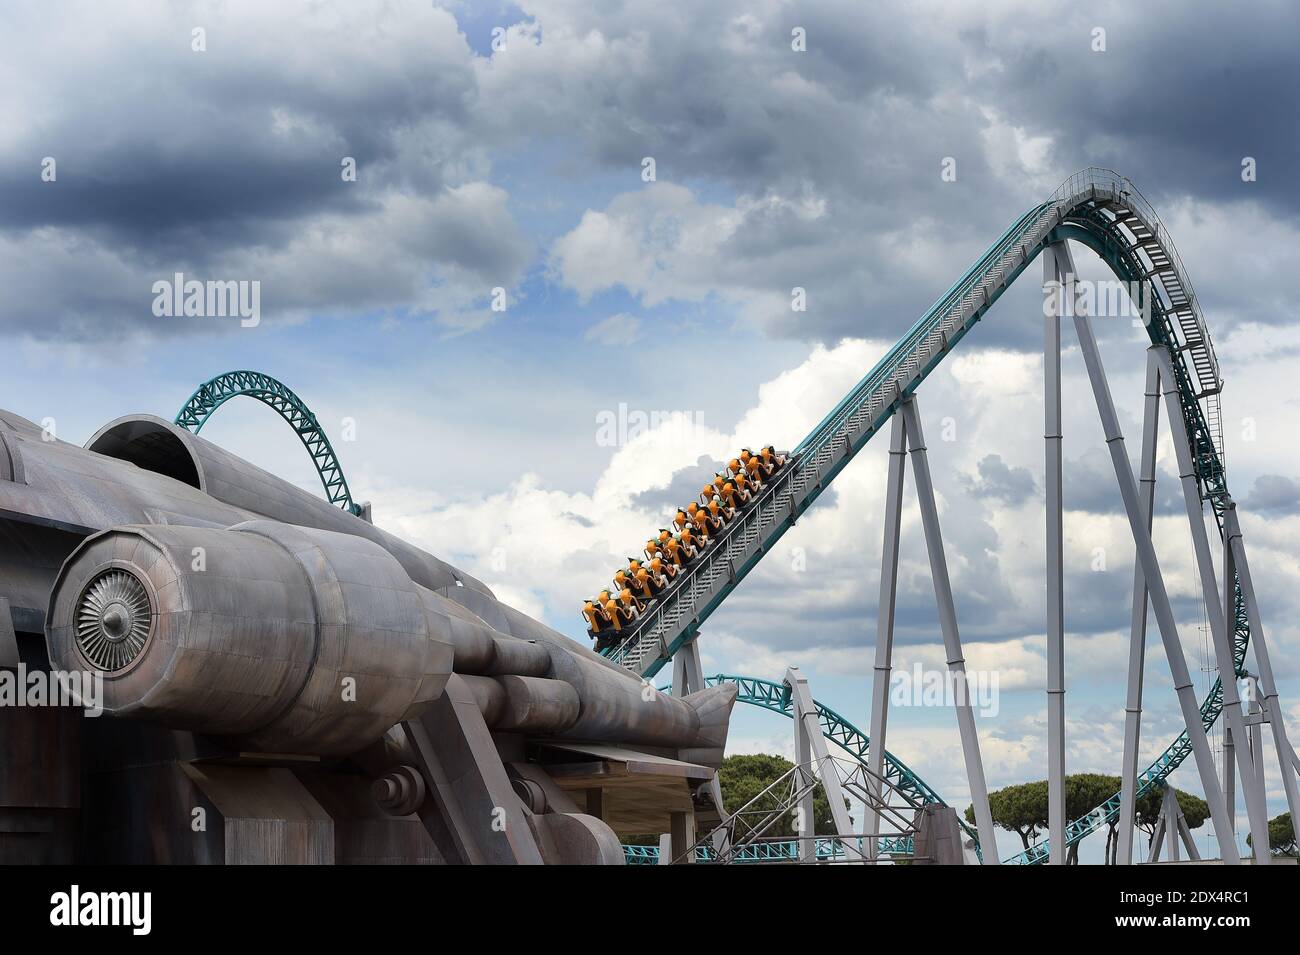 A view of the 10-inversion Intamin steel coaster at 'Cinecitta World', the  new italian movie theme park unveiled in Rome, Italy on July 10, 2014. A  richly detailed Italian theme park conjures